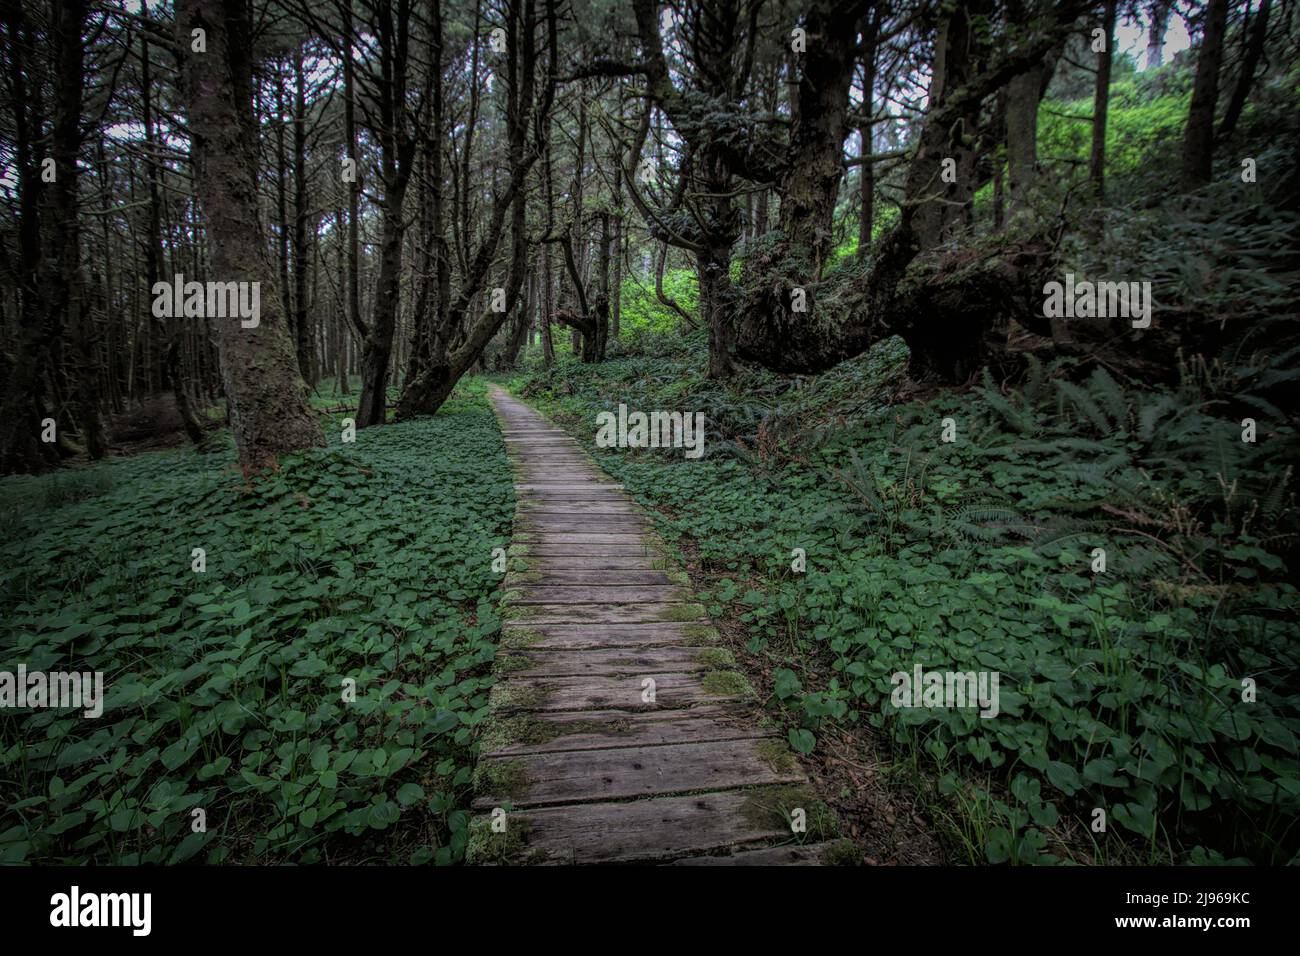 Rustic boardwalk leads into a forest for hikers to follow near Long Beach in Pacific Rim National Park in British Columbia, Canada. Stock Photo